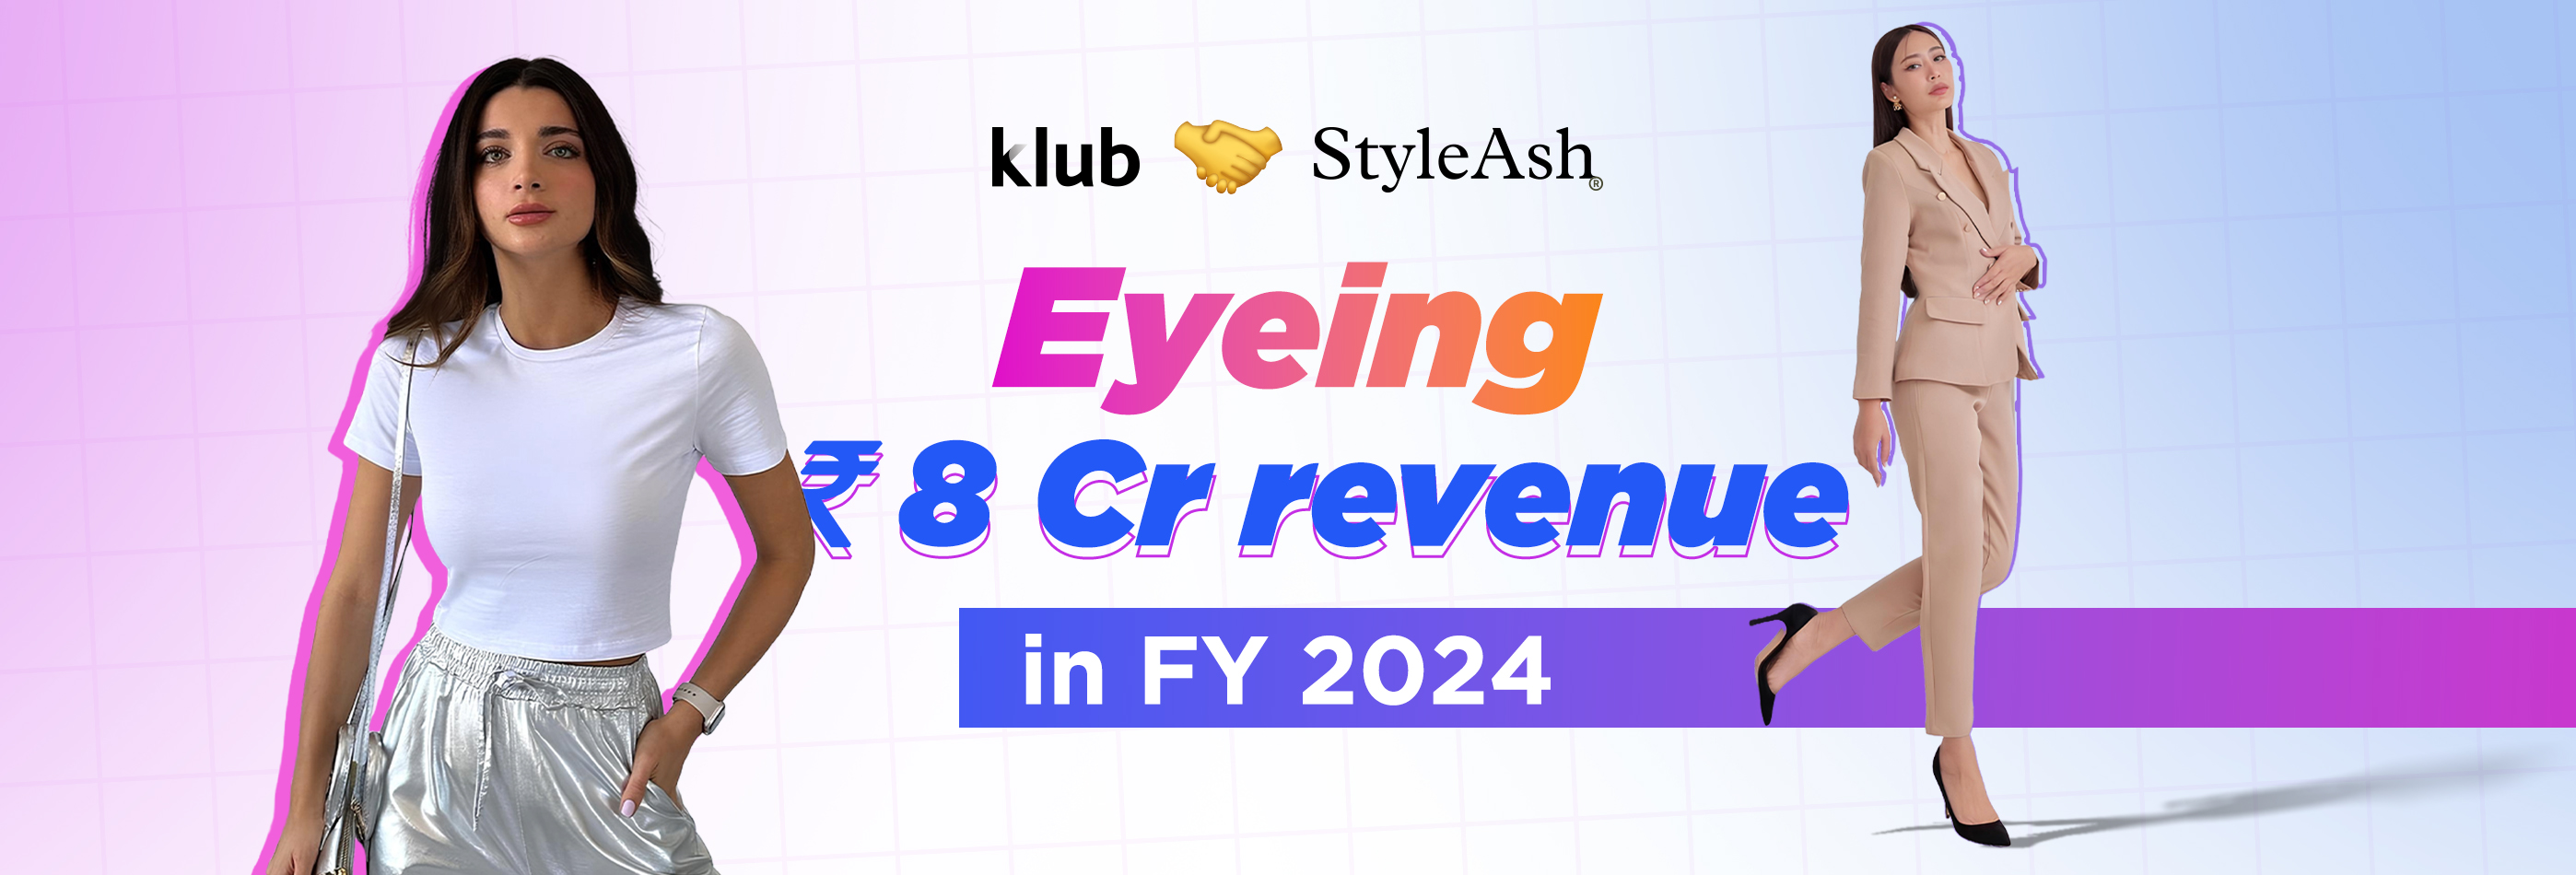 StyleAsh secures strategic funding from Klub to fuel growth, targets INR 8 crores revenue in FY 2024